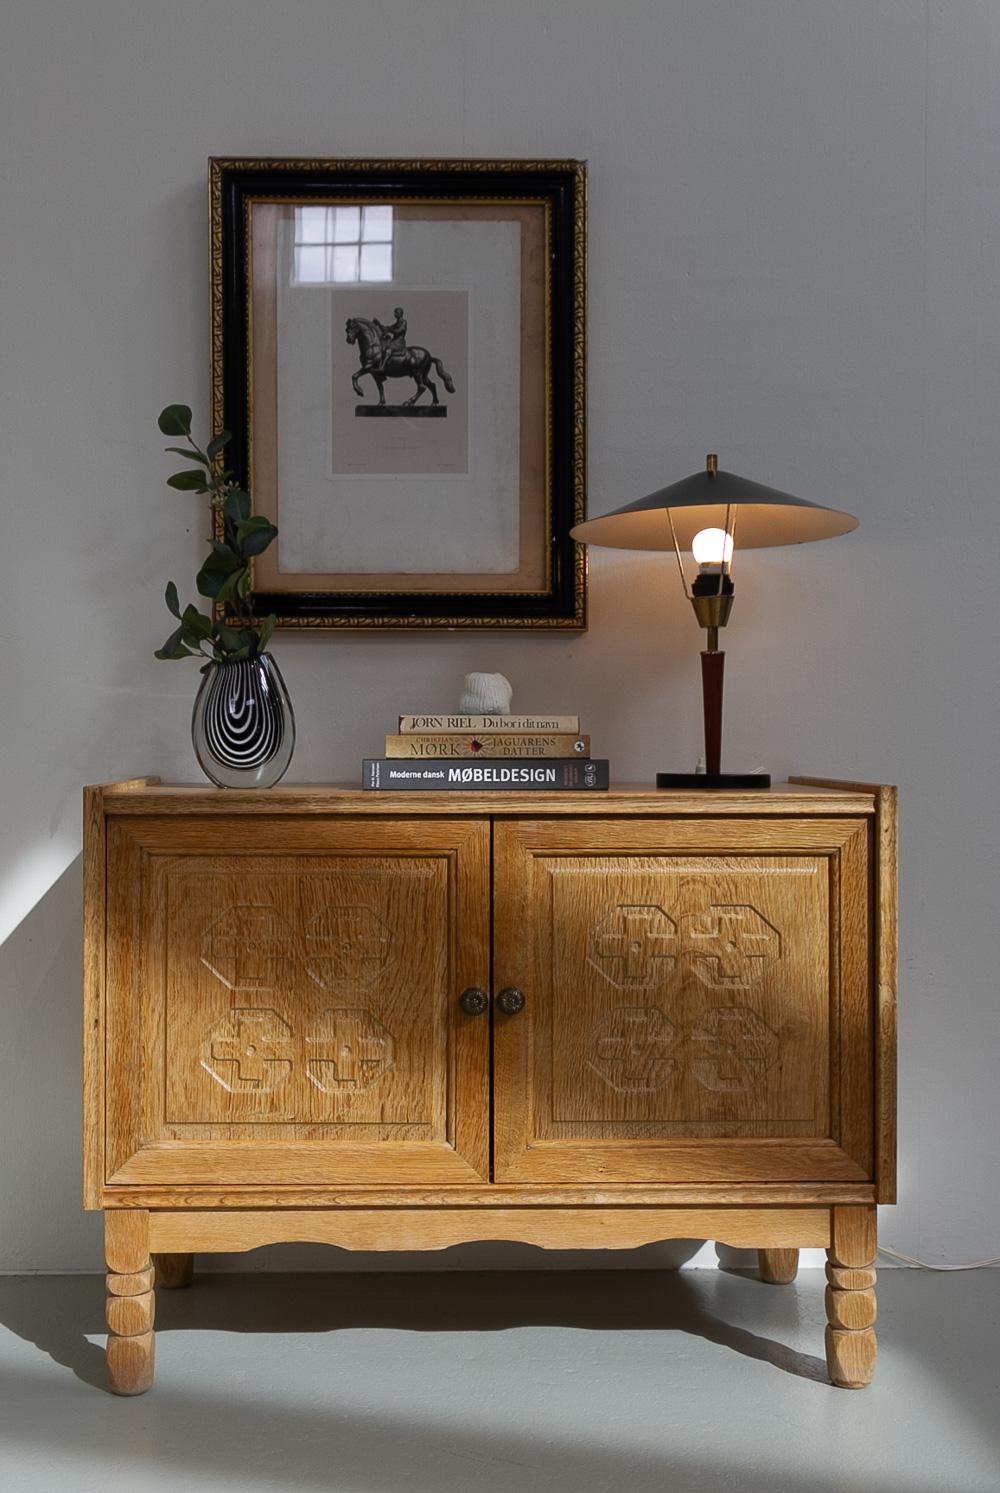 Danish Modern Oak Cabinet by Kjærnulf, 1960s.
Danish Mid-century Modern cabinet or small sideboard in Nordic oak. Produced in Denmark in the 1960s and attributed to Danish designer Henning/Henry Kjærnulf who is world famous for combining